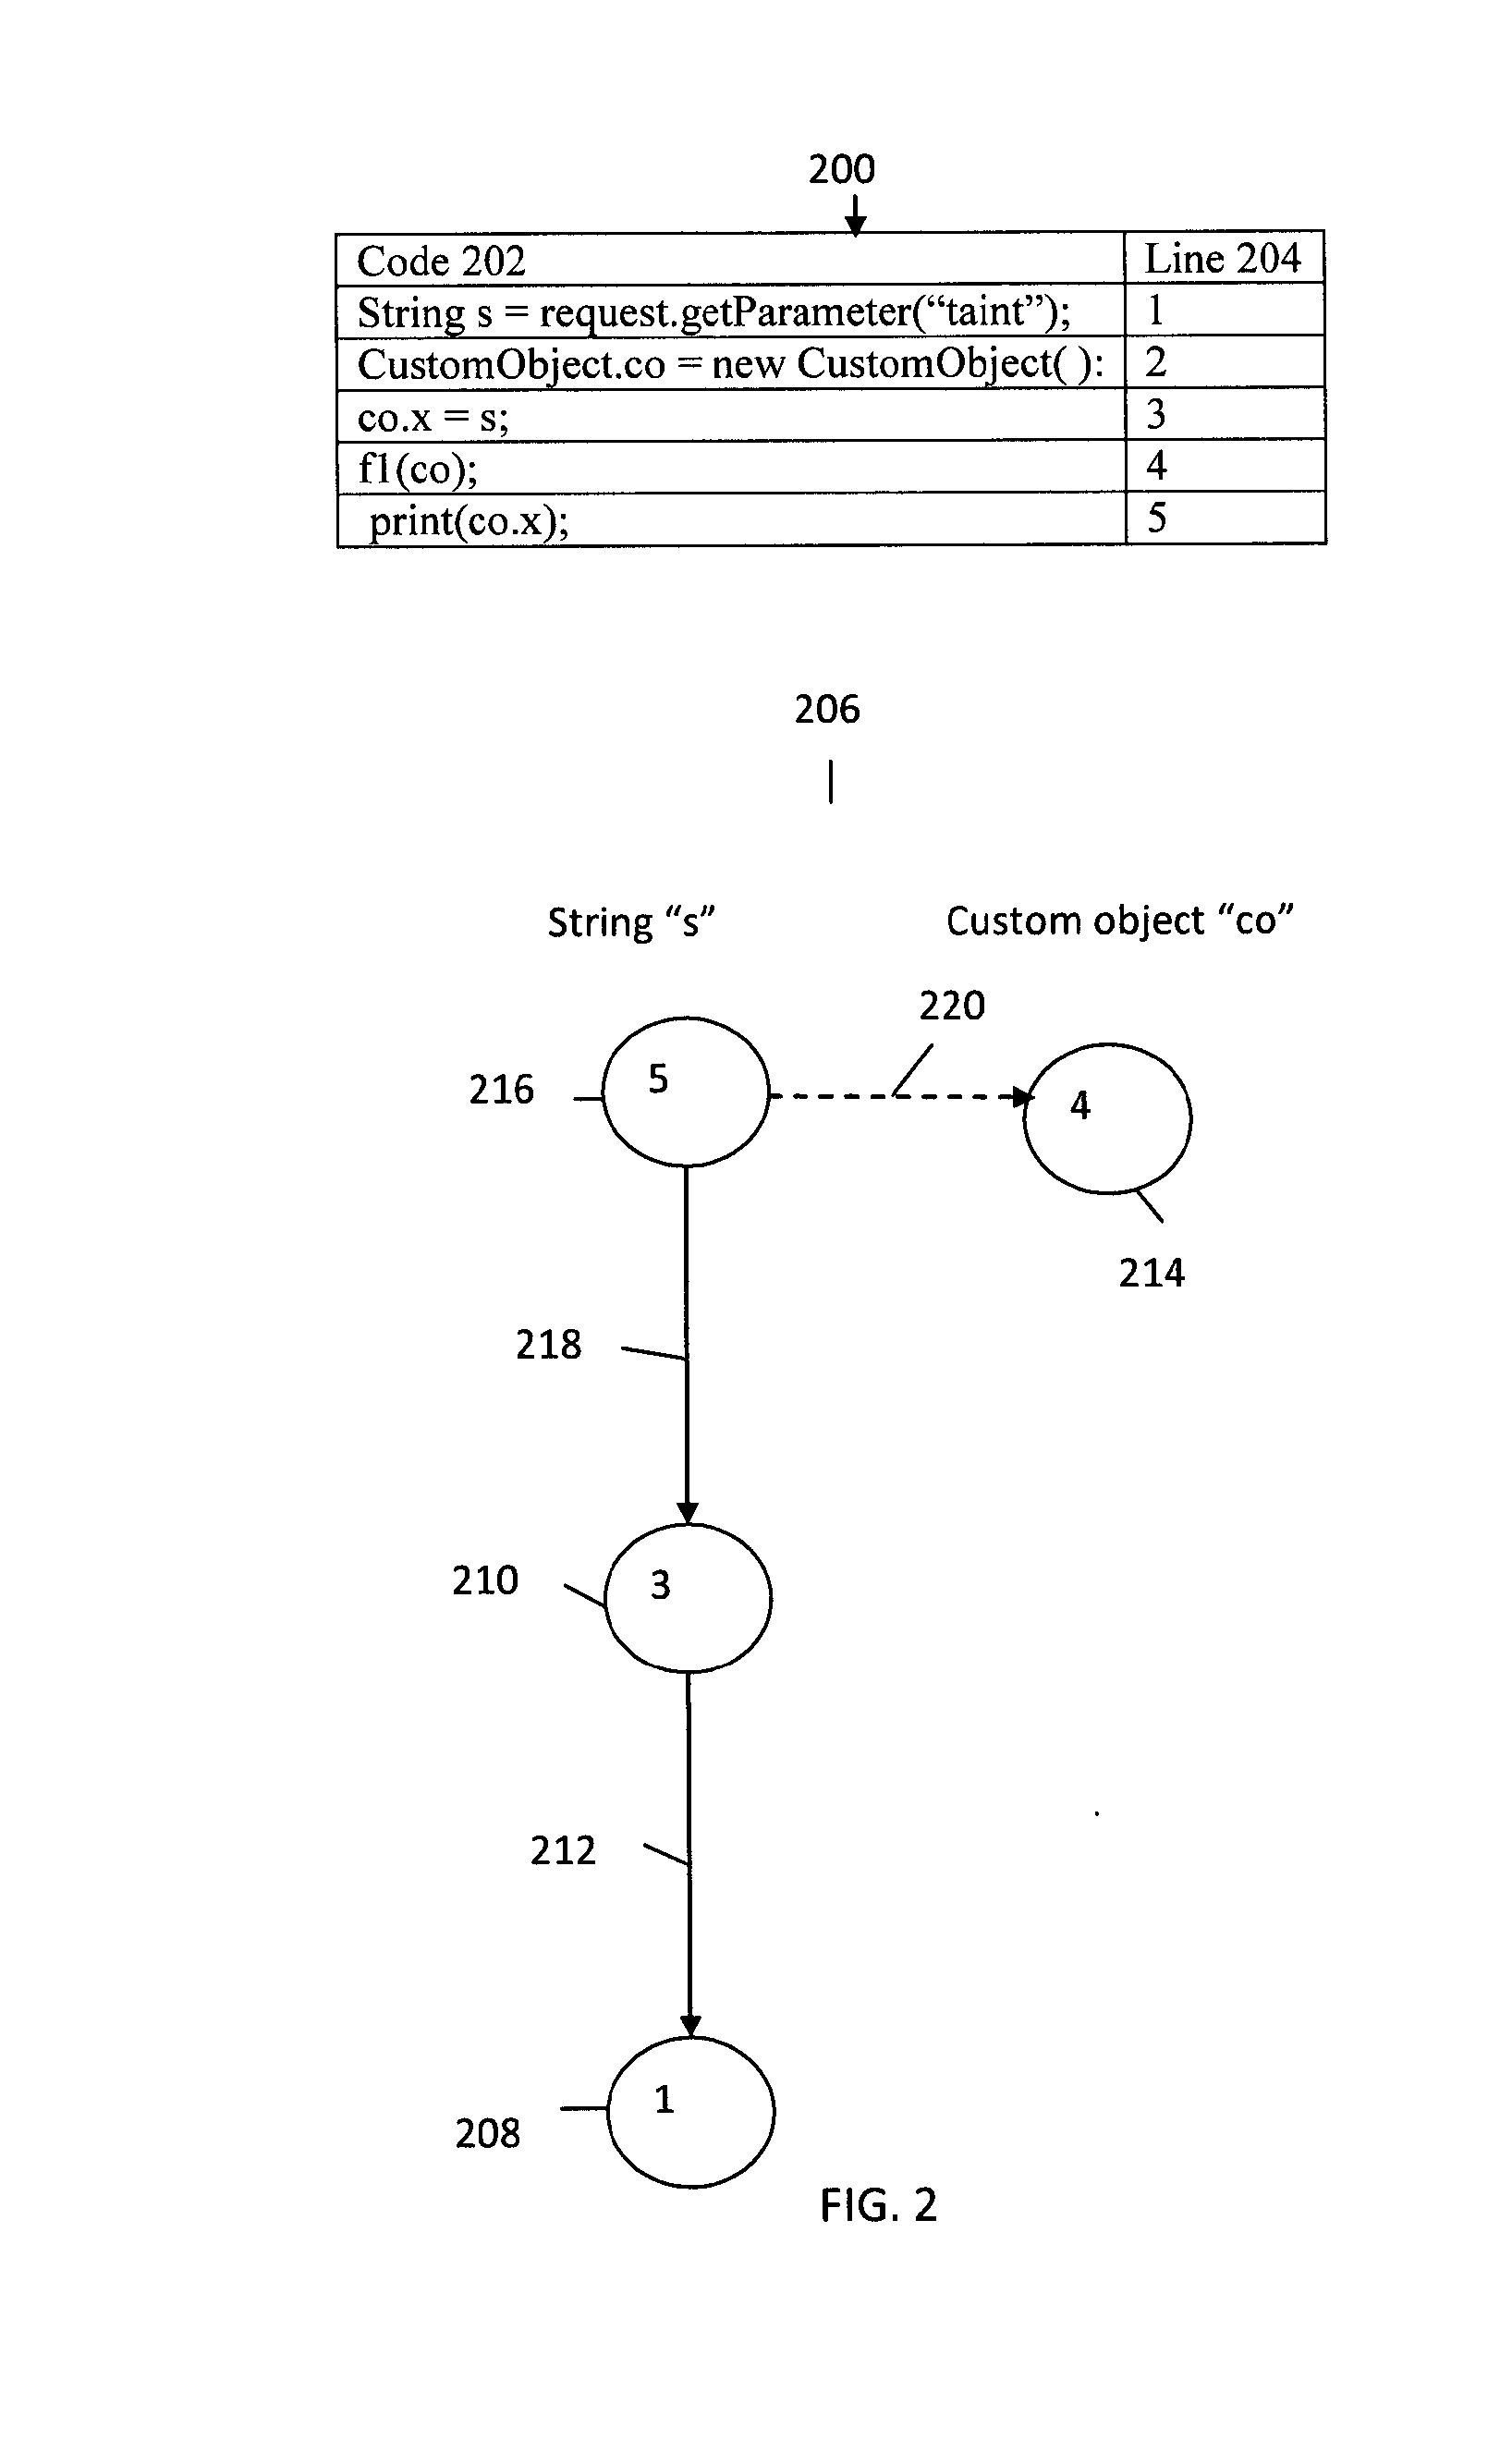 System and method for dynamic analysis bytecode injection for application dataflow